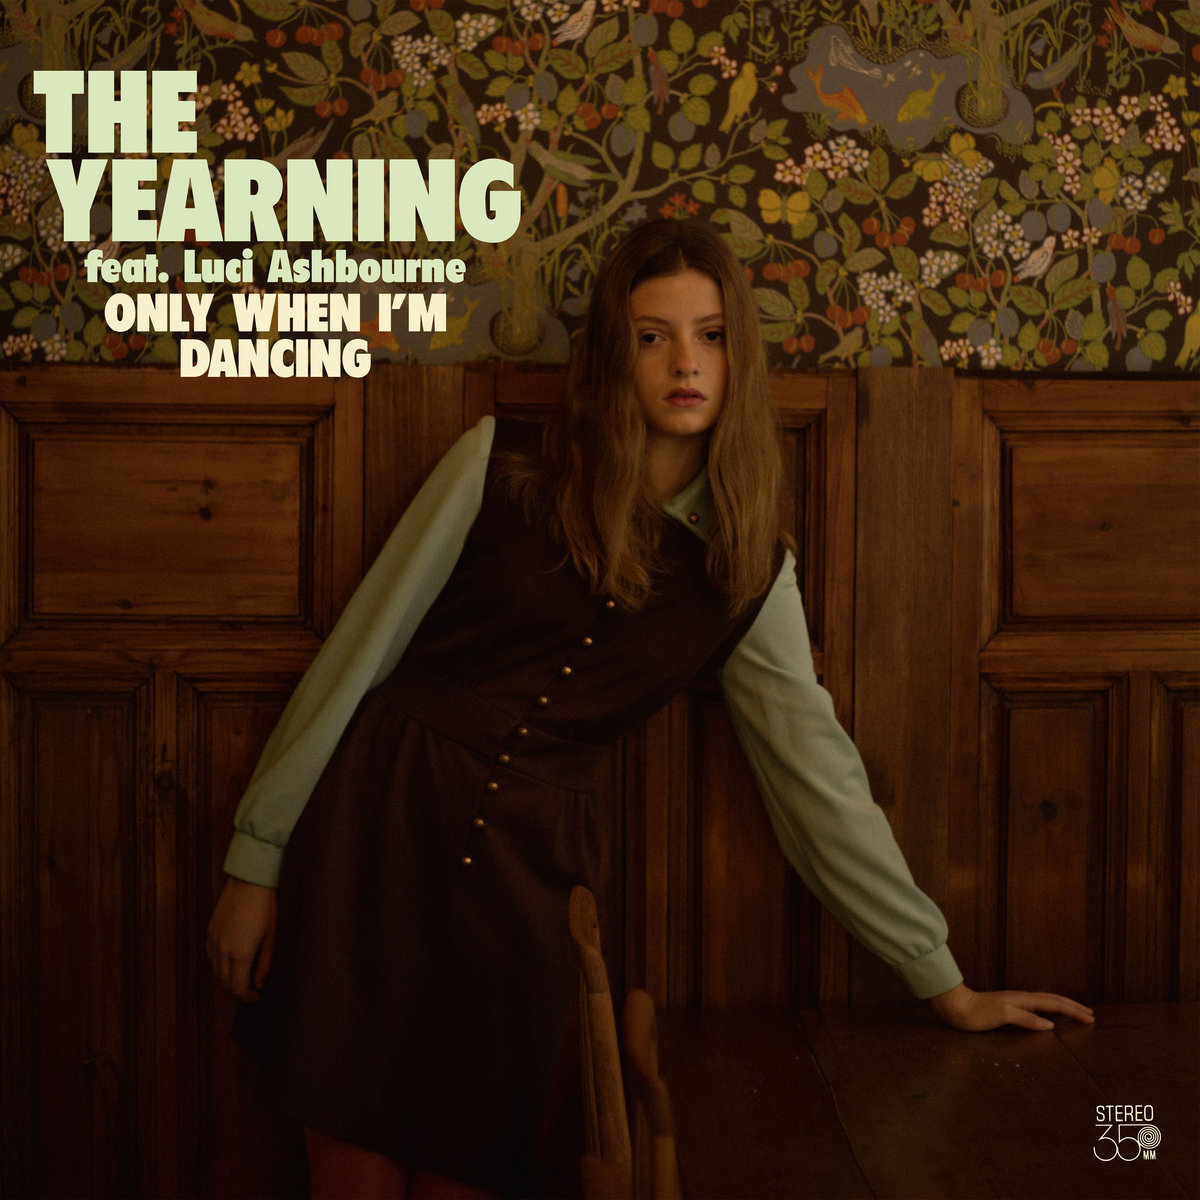 The Yearning "Only When I'm Dancing" LP